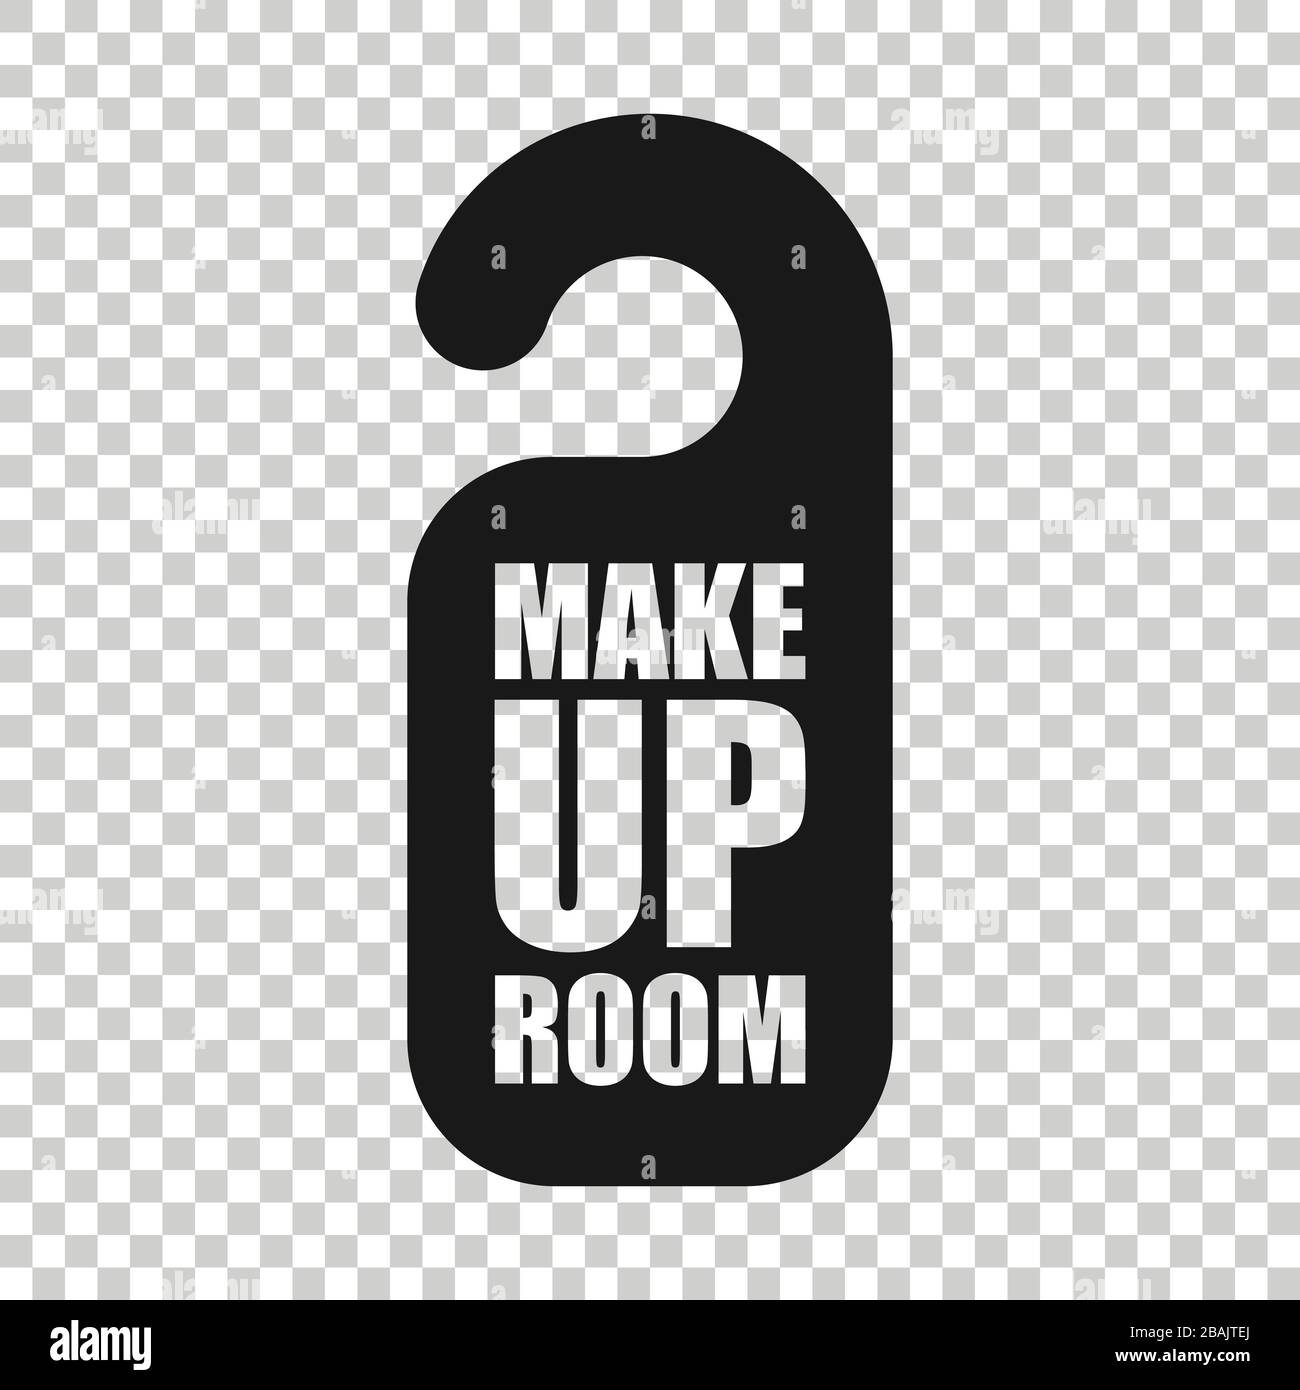 Make up room hotel sign icon in flat style. Inn vector illustration on white isolated background. Hostel clean business concept. Stock Vector